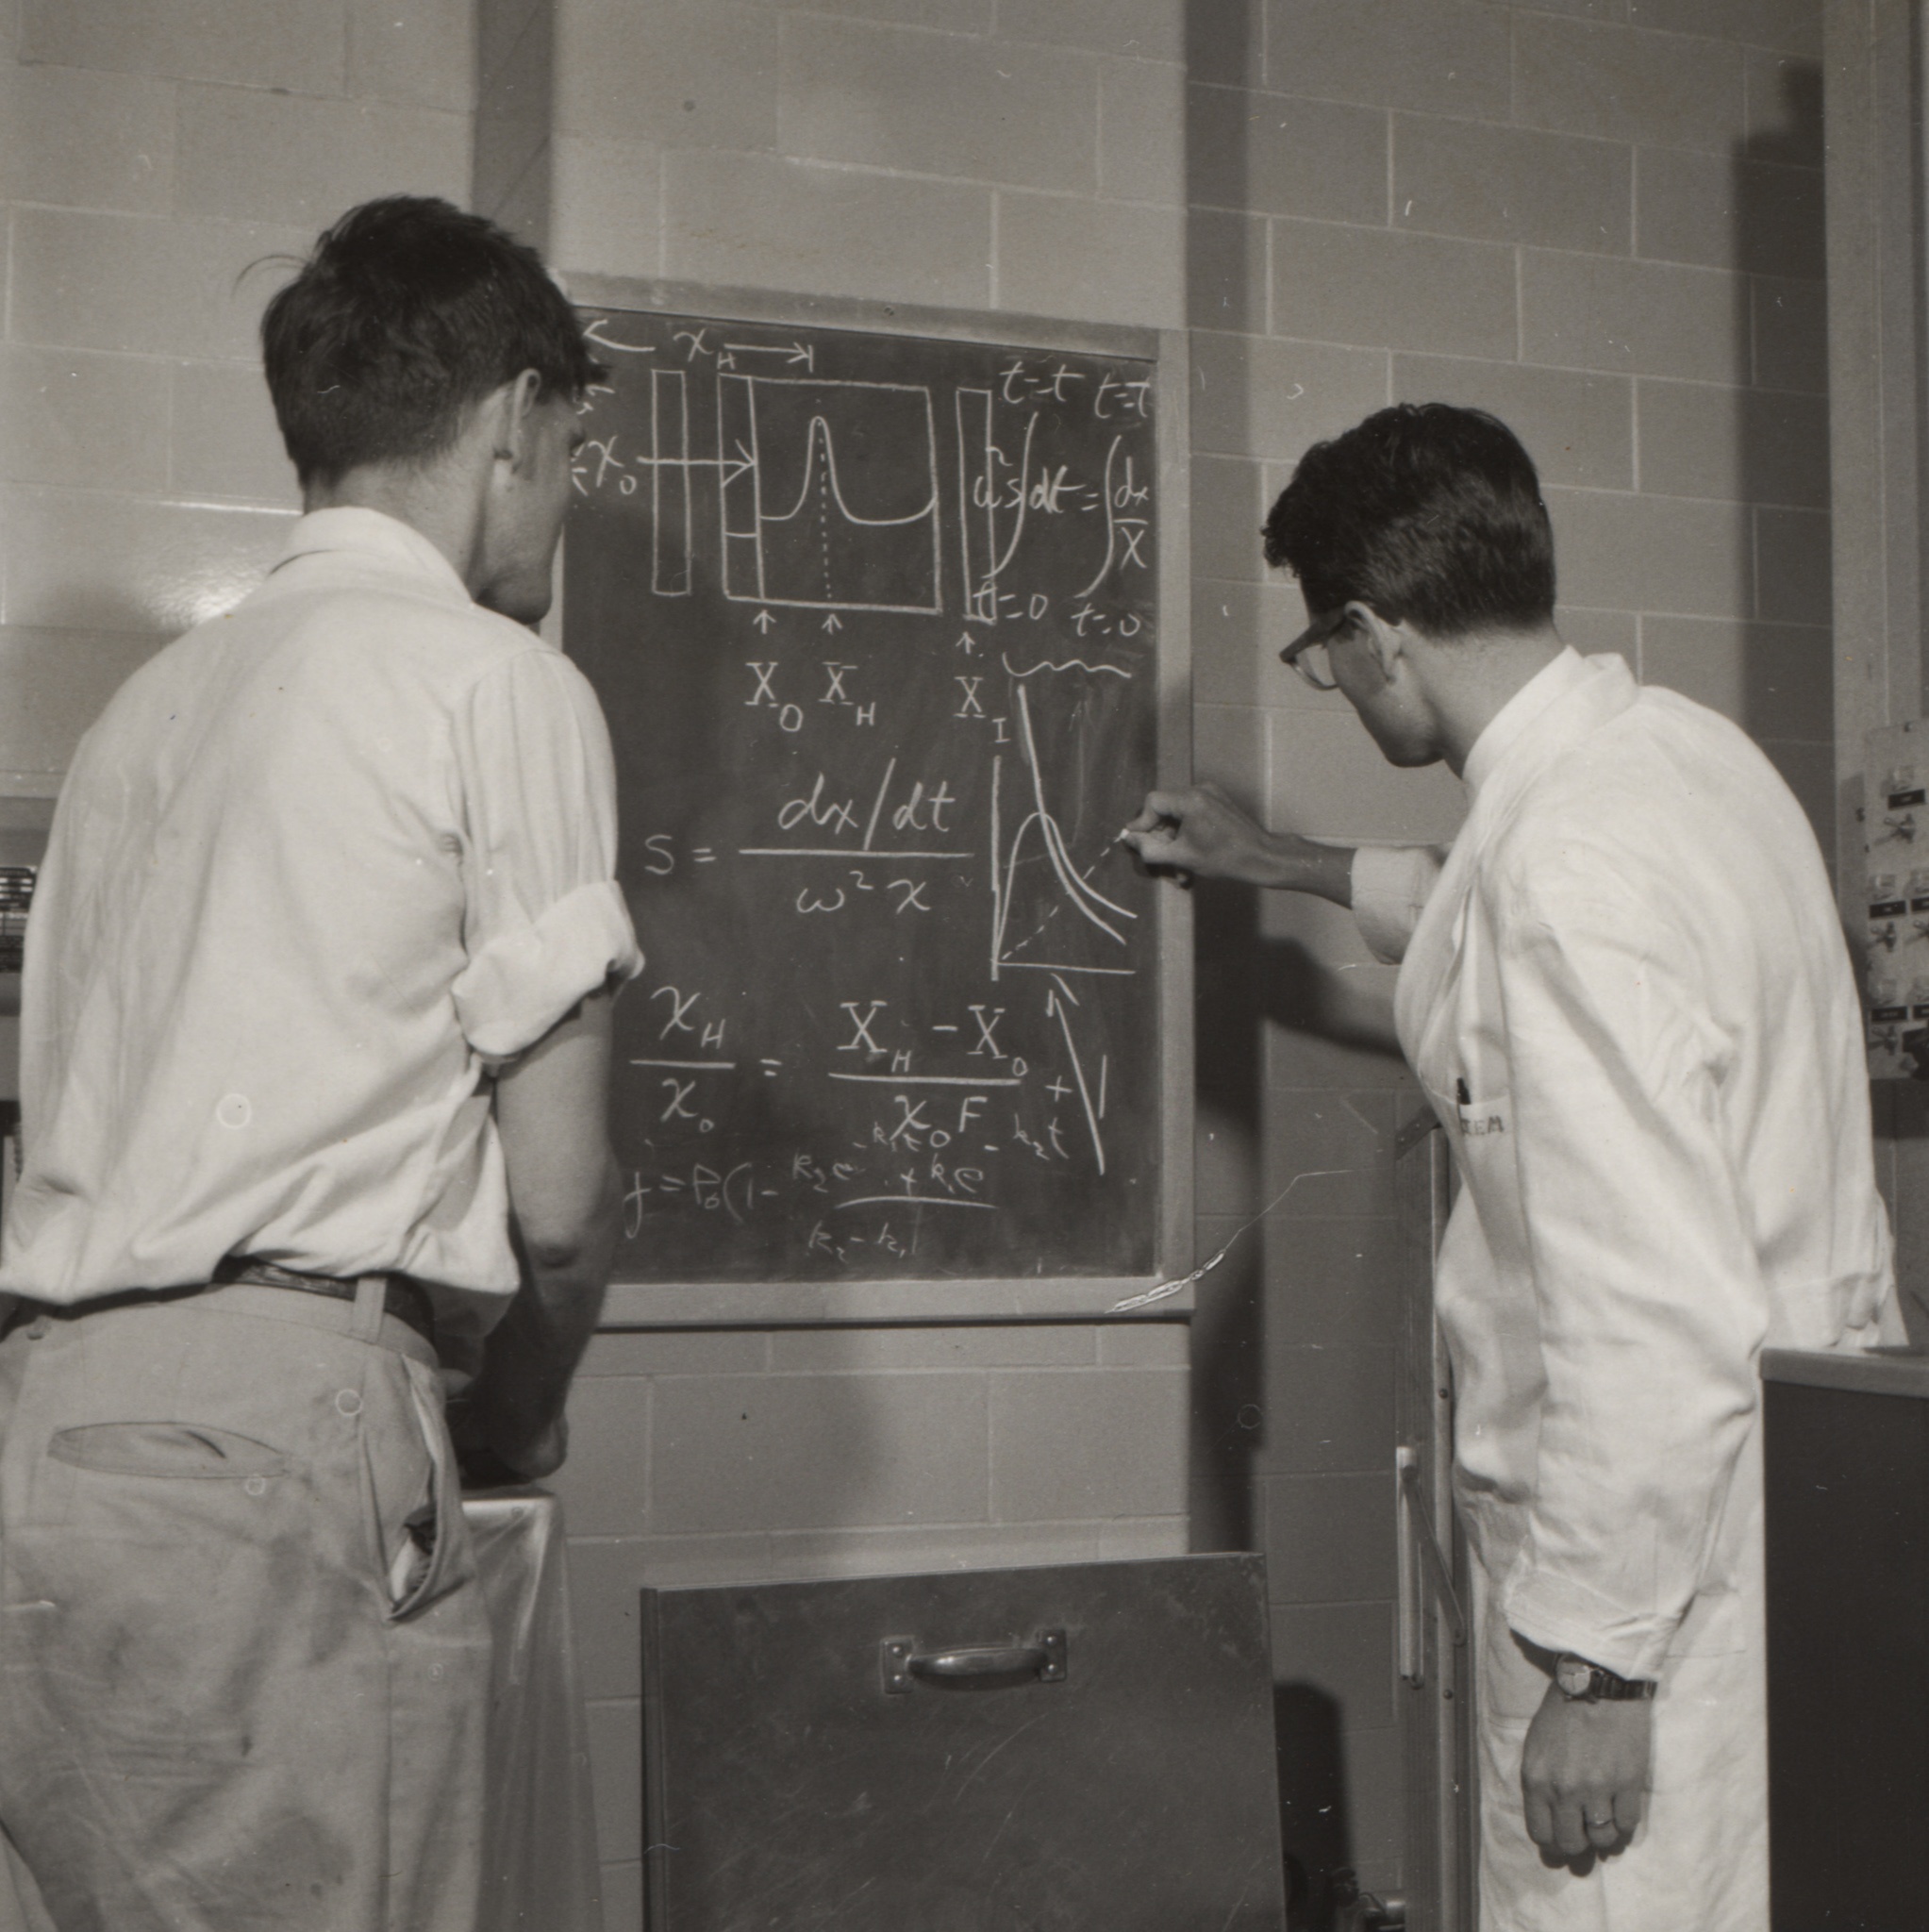 a black and white photo of two men working on an equation on a chalkboard. One man wears a white lab coat